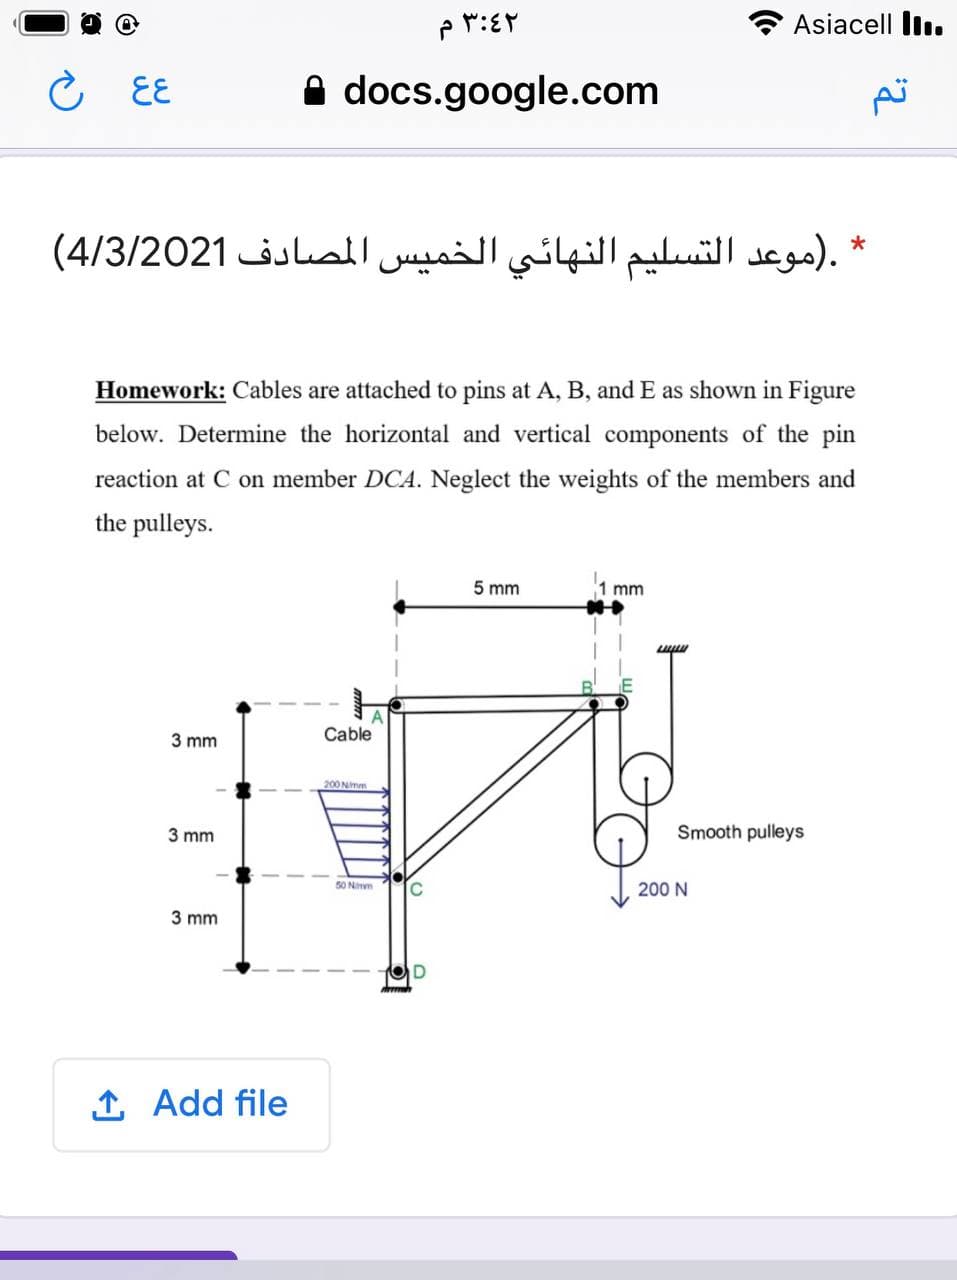 Asiacell Iln.
C EE
A docs.google.com
تم
.)موعد التسليم النهائي الخميس المصادف 4/3/2021(
Homework: Cables are attached to pins at A, B, and E as shown in Figure
below. Determine the horizontal and vertical components of the pin
reaction at C on member DCA. Neglect the weights of the members and
the pulleys.
5 mm
mm
3 mm
Cable
200 Nimm
3 mm
Smooth pulleys
50 Ninm
200 N
3 mm
1 Add file
